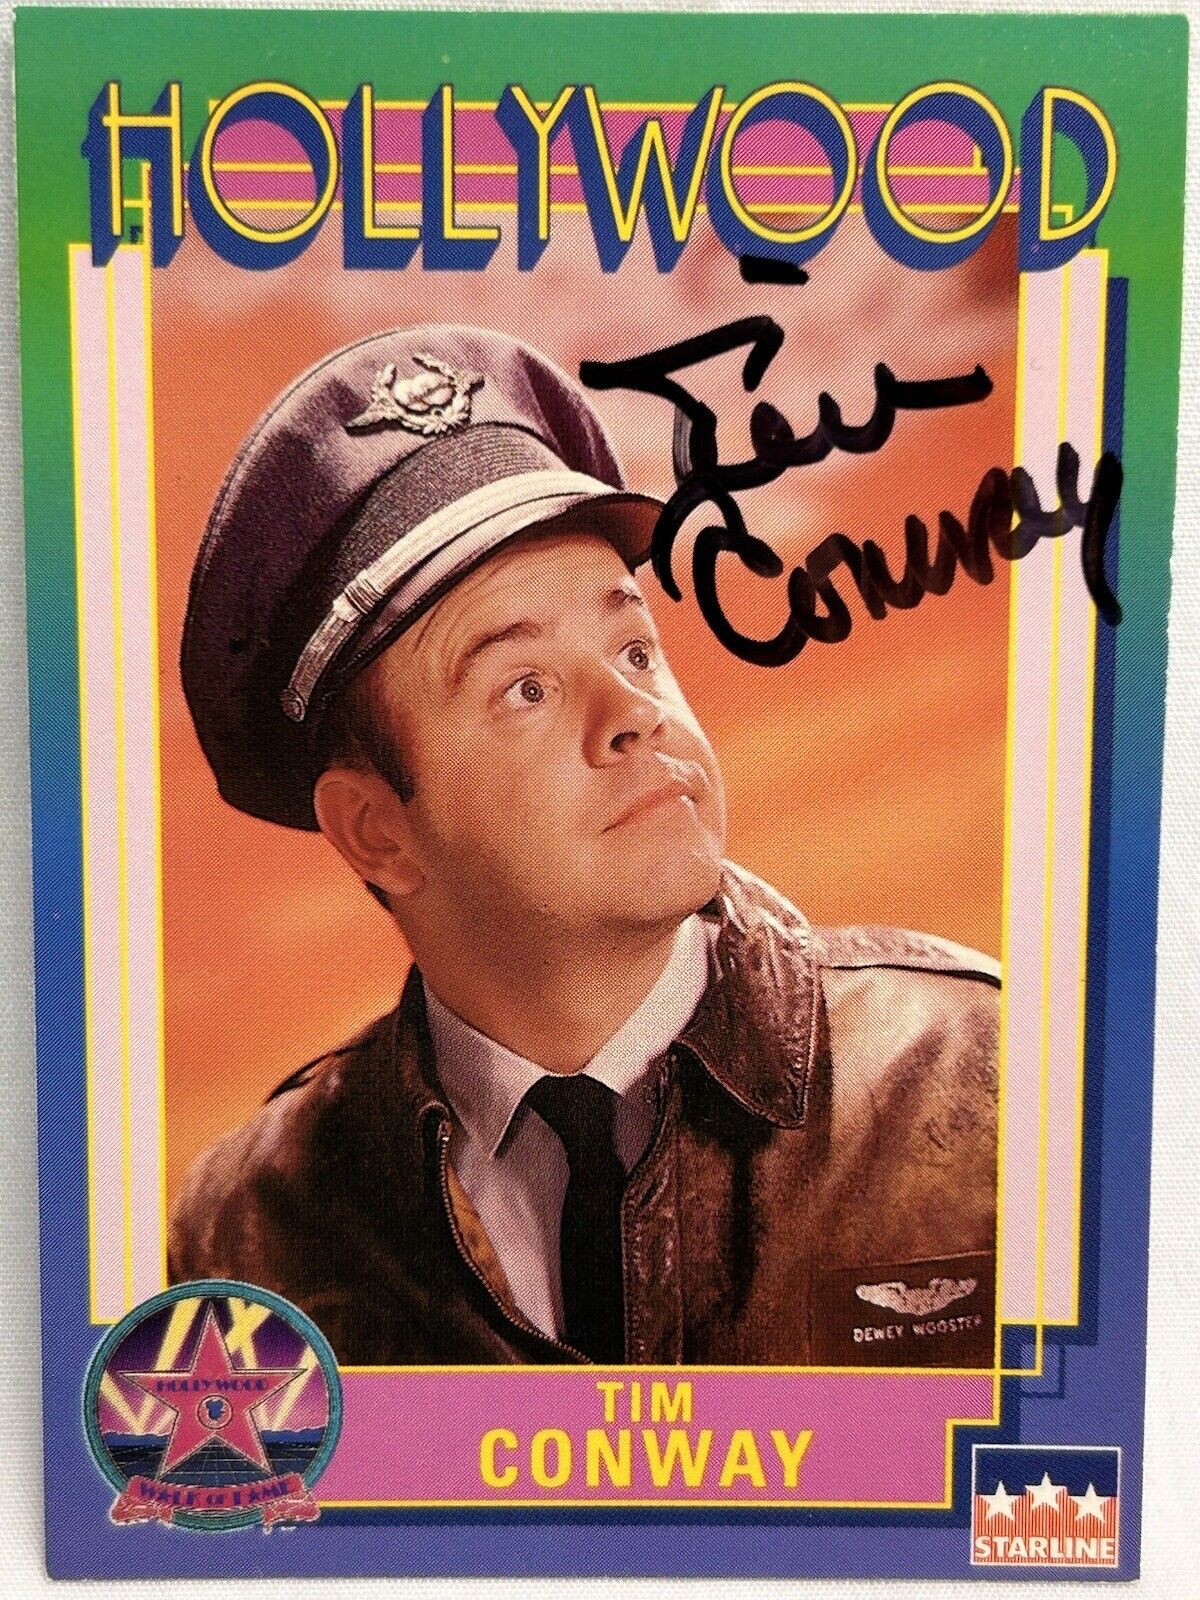 Tim Conway Comedian Actor #66 Signed Hollywood Starline Trading Card 1991